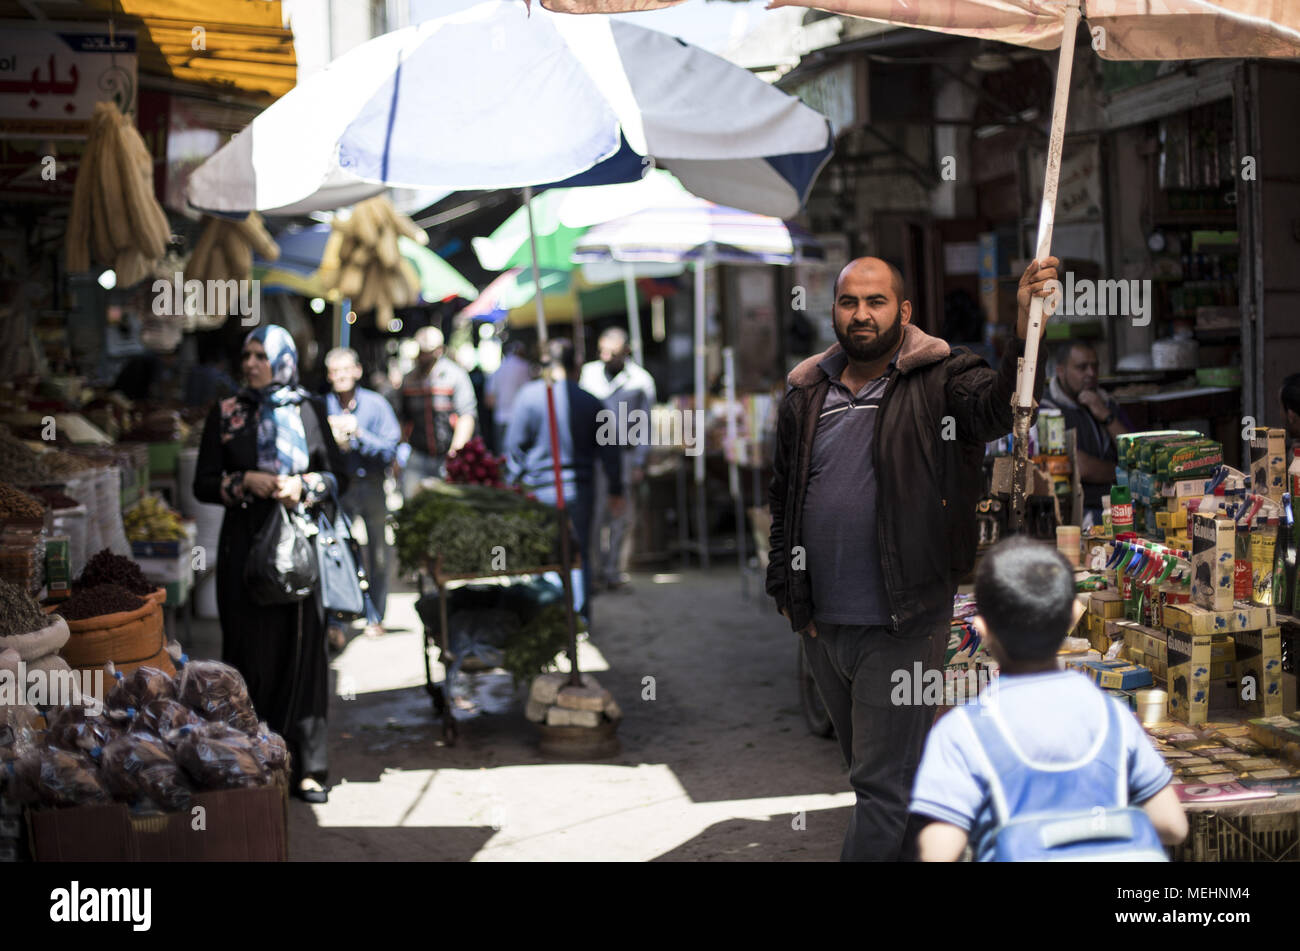 Gaza City, The Gaza Strip, Palestine. 22nd Apr, 2018. Palestinians shop at a market in Gaza city on April 22, 2018. Gazans are strapped for cash and markets are suffering from an unprecedented recession. Credit: Mahmoud Issa/Quds Net News/ZUMA Wire/Alamy Live News Stock Photo